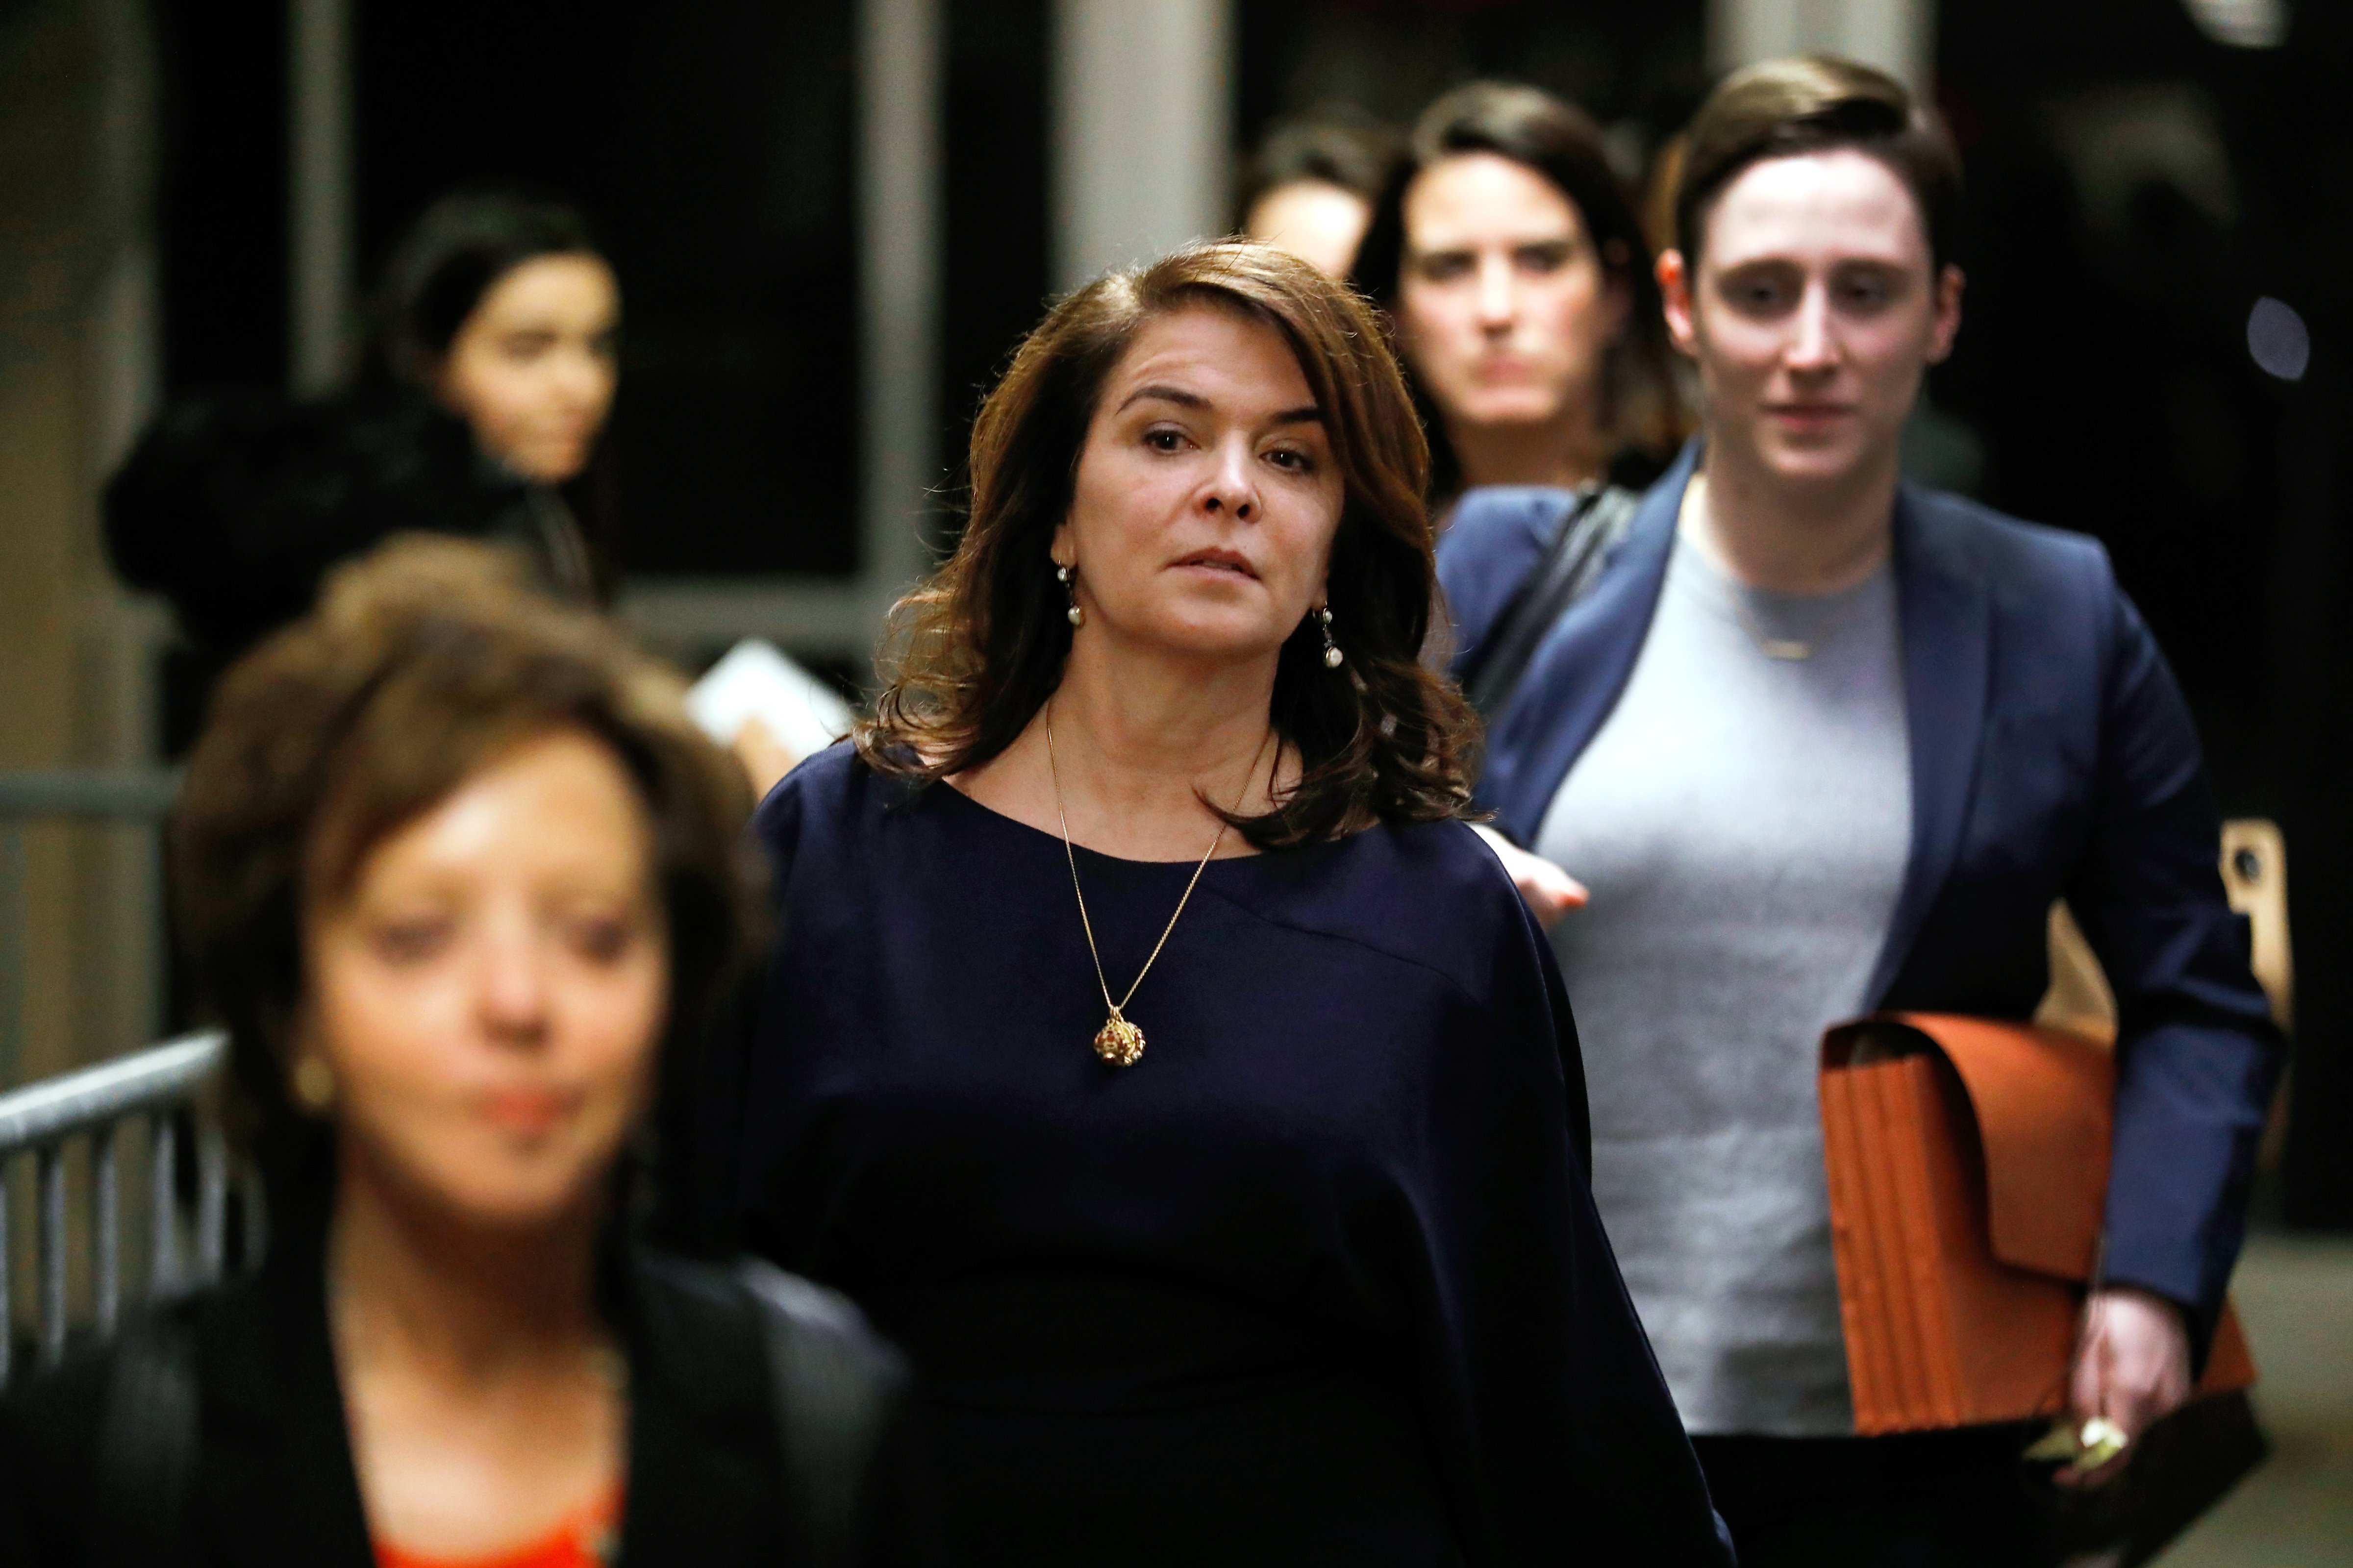 Actress Annabella Sciorra, center, exits the court room during a break at state supreme court in New York on Jan. 23, 2020. (Peter Foley—Bloomberg/Getty Images)